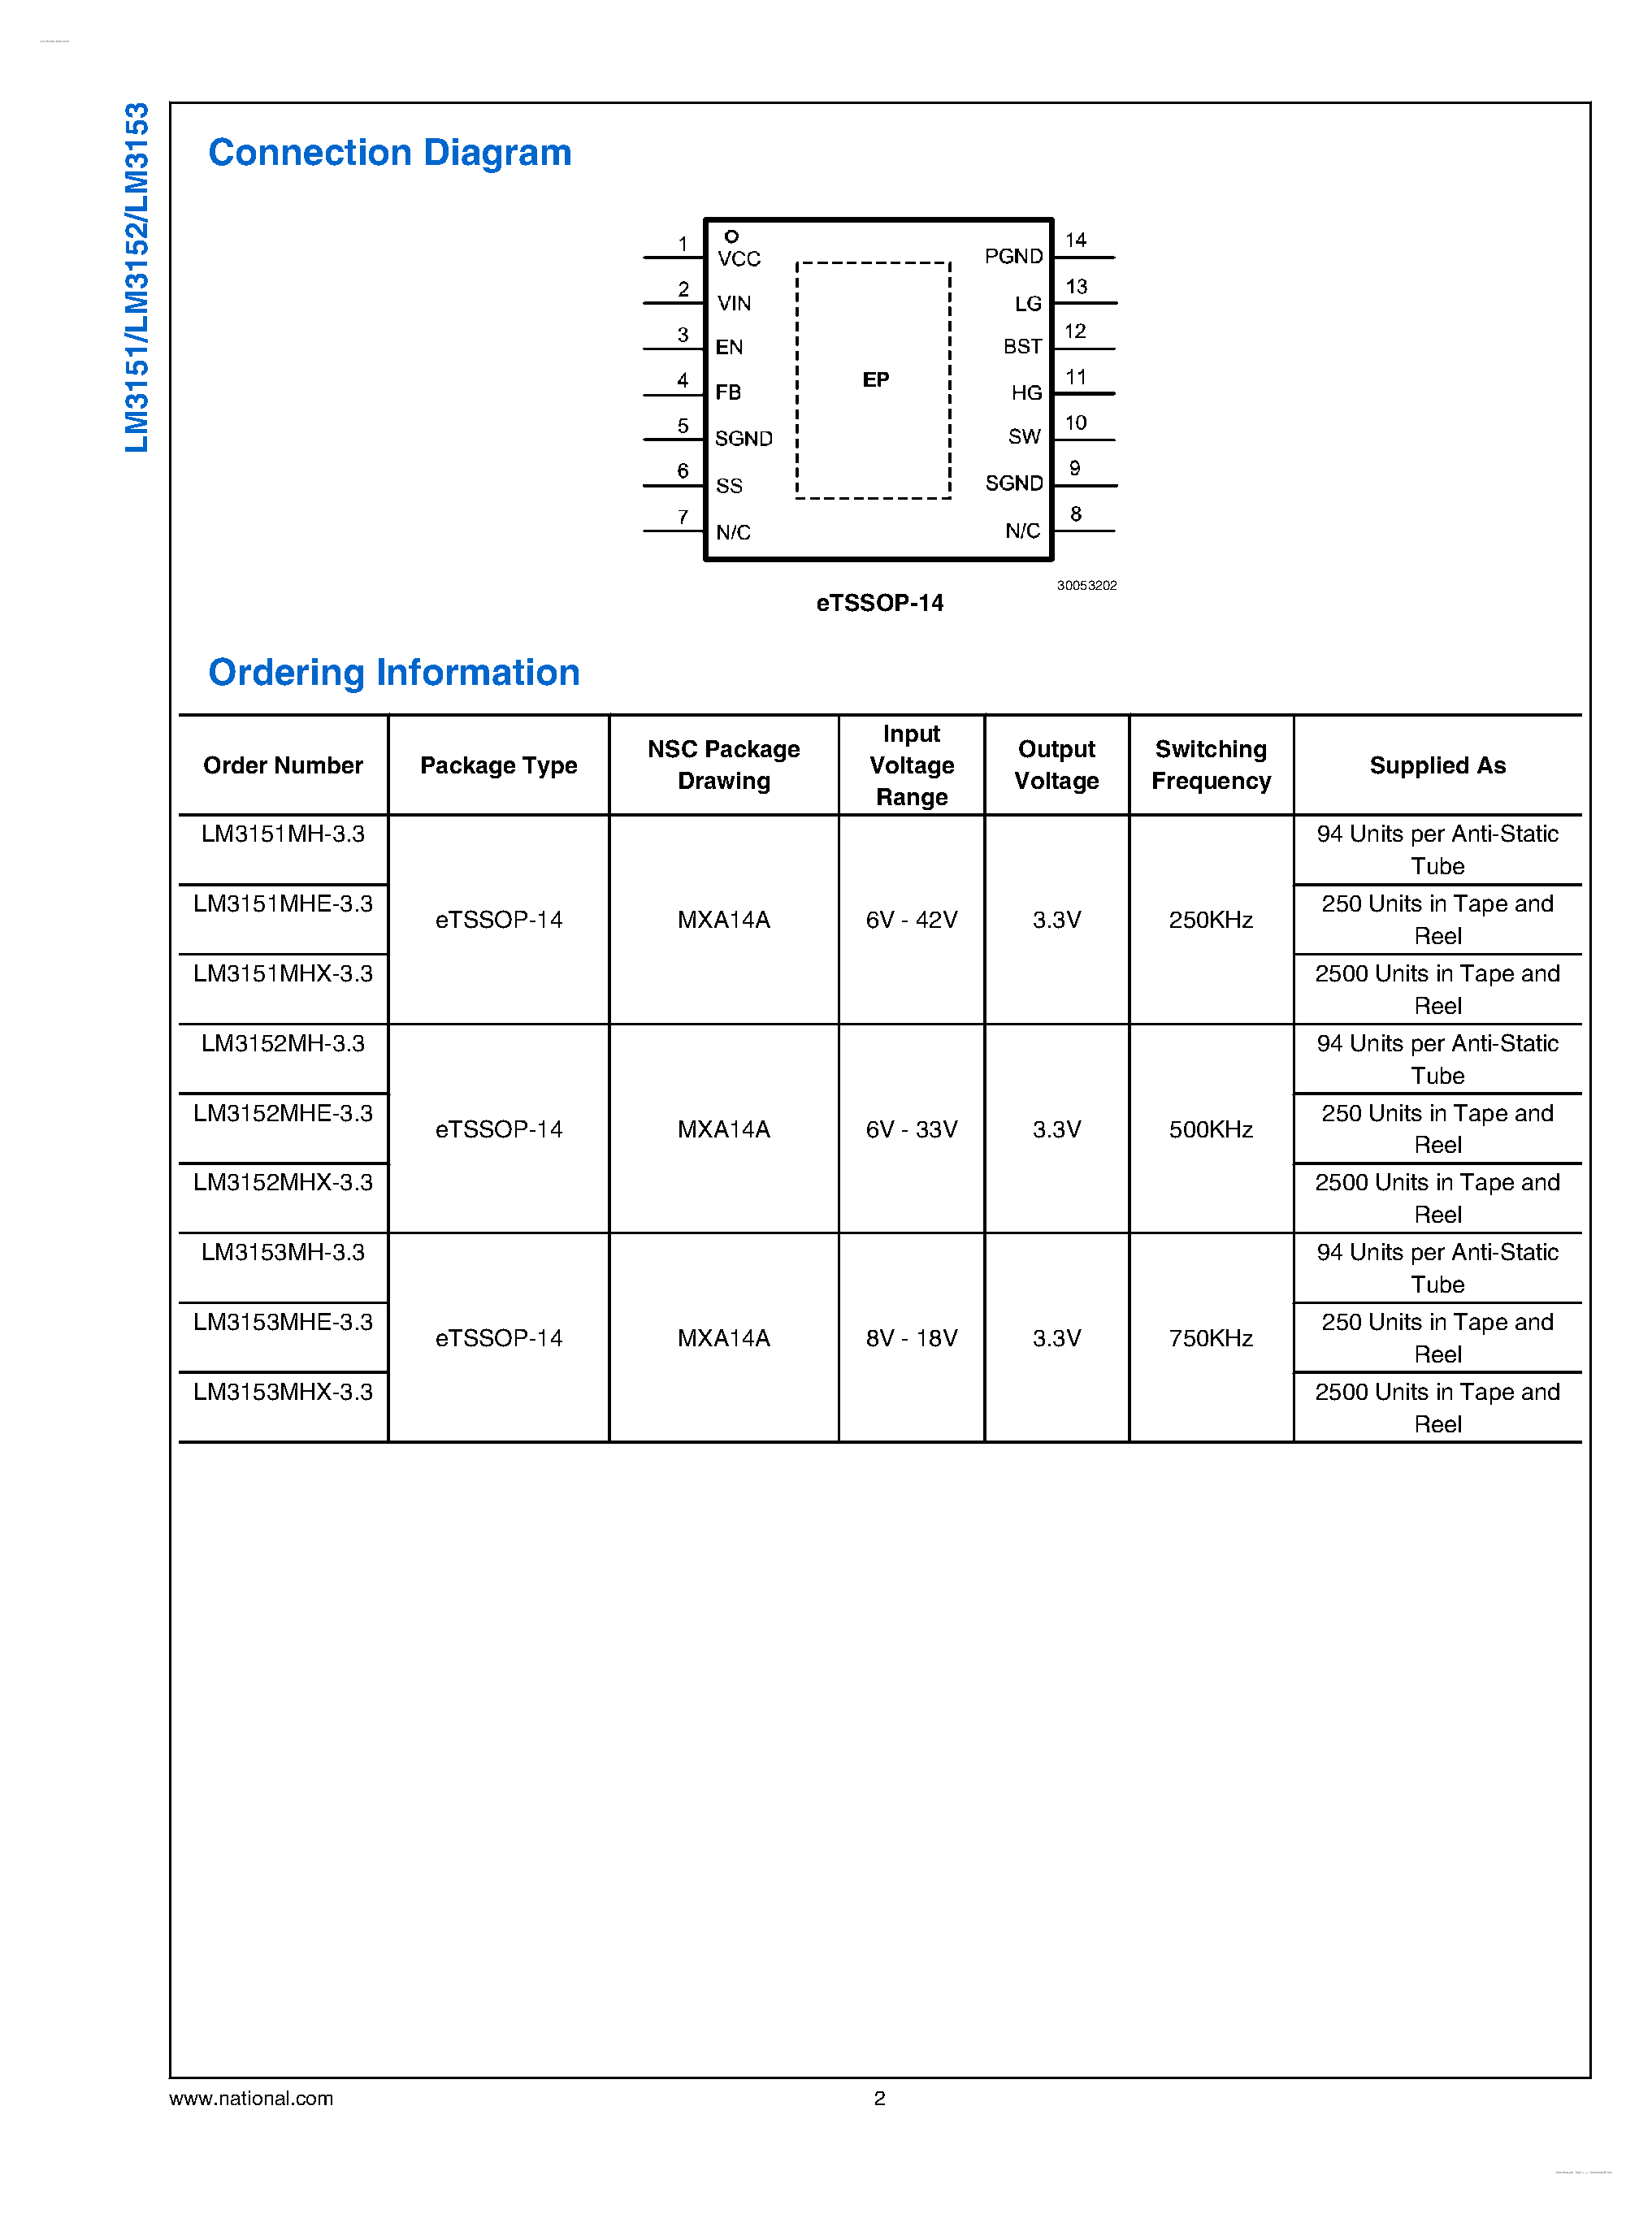 Datasheet LM3151 - (LM3151 - LM3153) SIMPLE SWITCHER CONTROLLER page 2